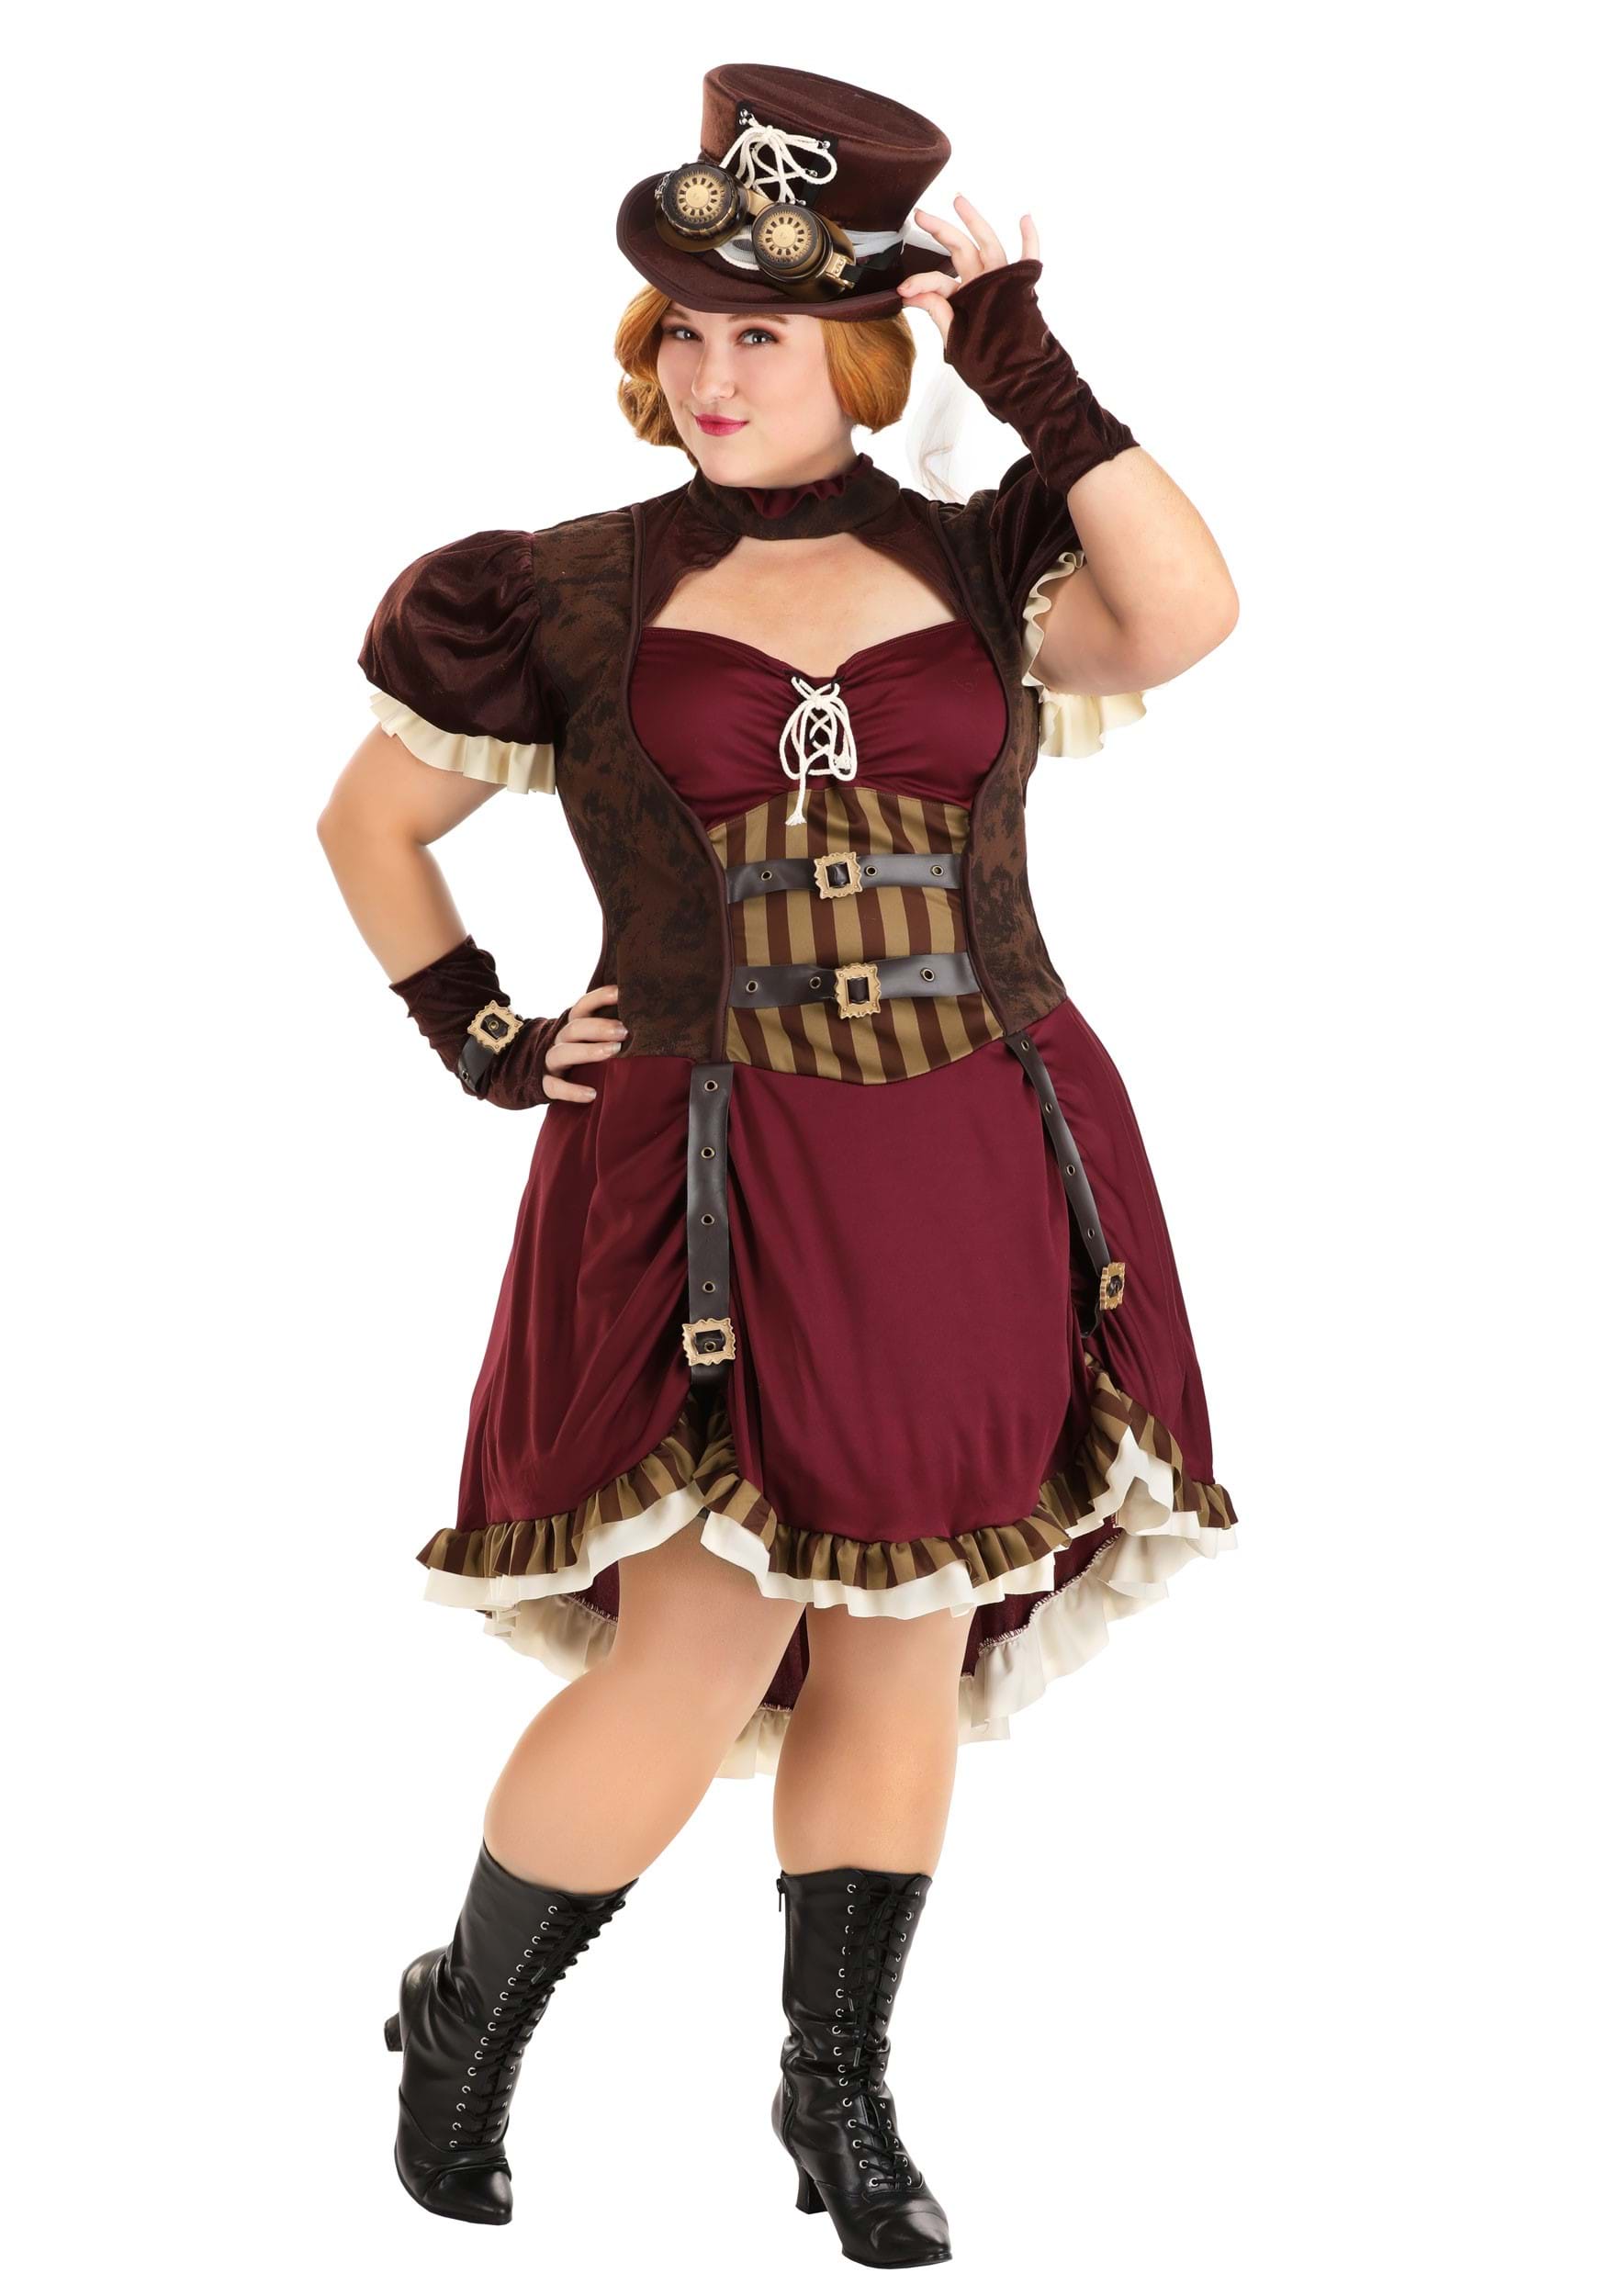 https://images.halloweencostumes.com/products/28448/1-1/plus-size-steampunk-lady-costume-1.jpg